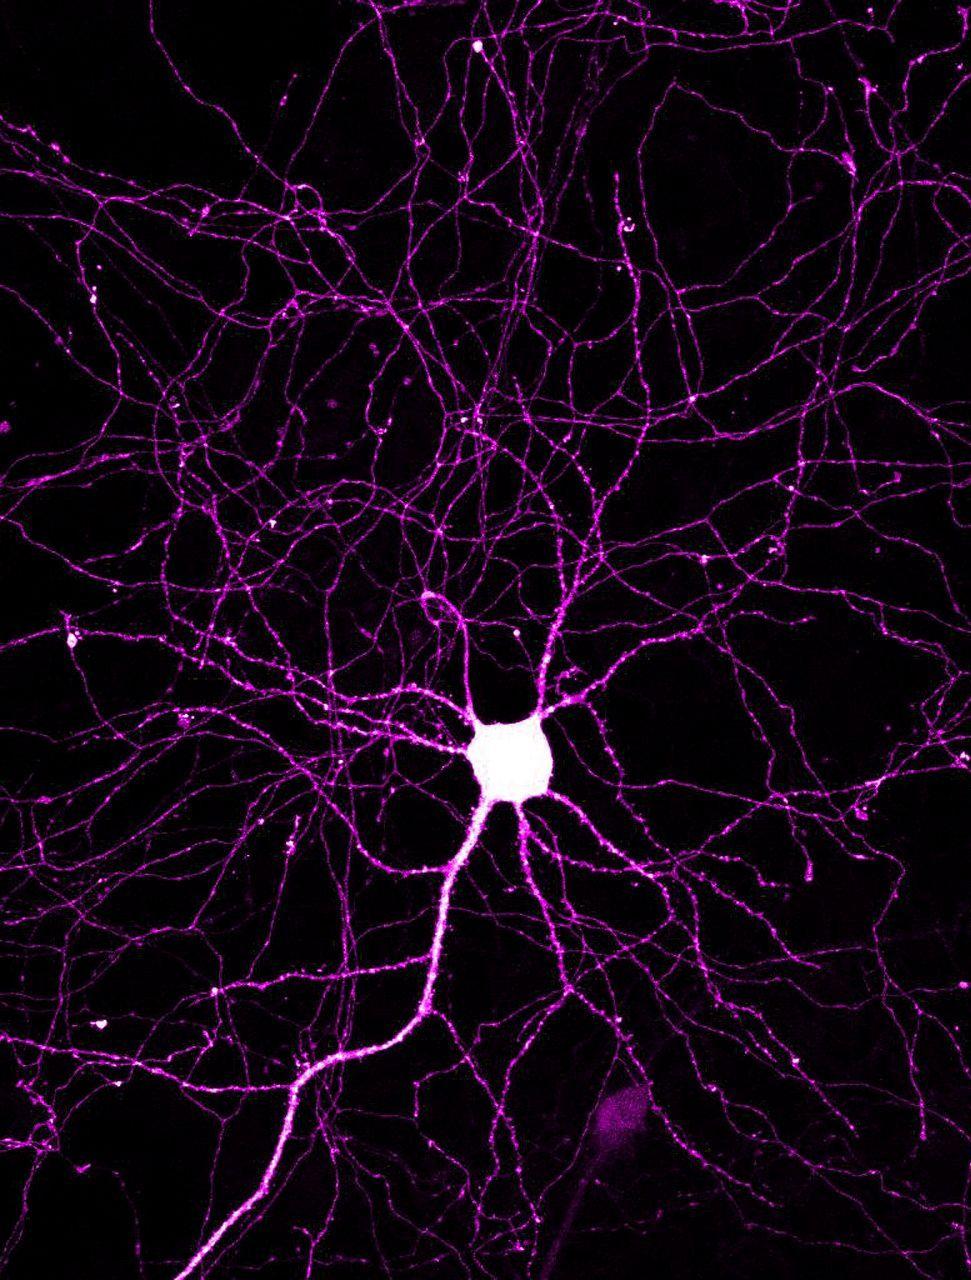 The axons and dendrites of a cortical neuron. Anatomy & Physiology